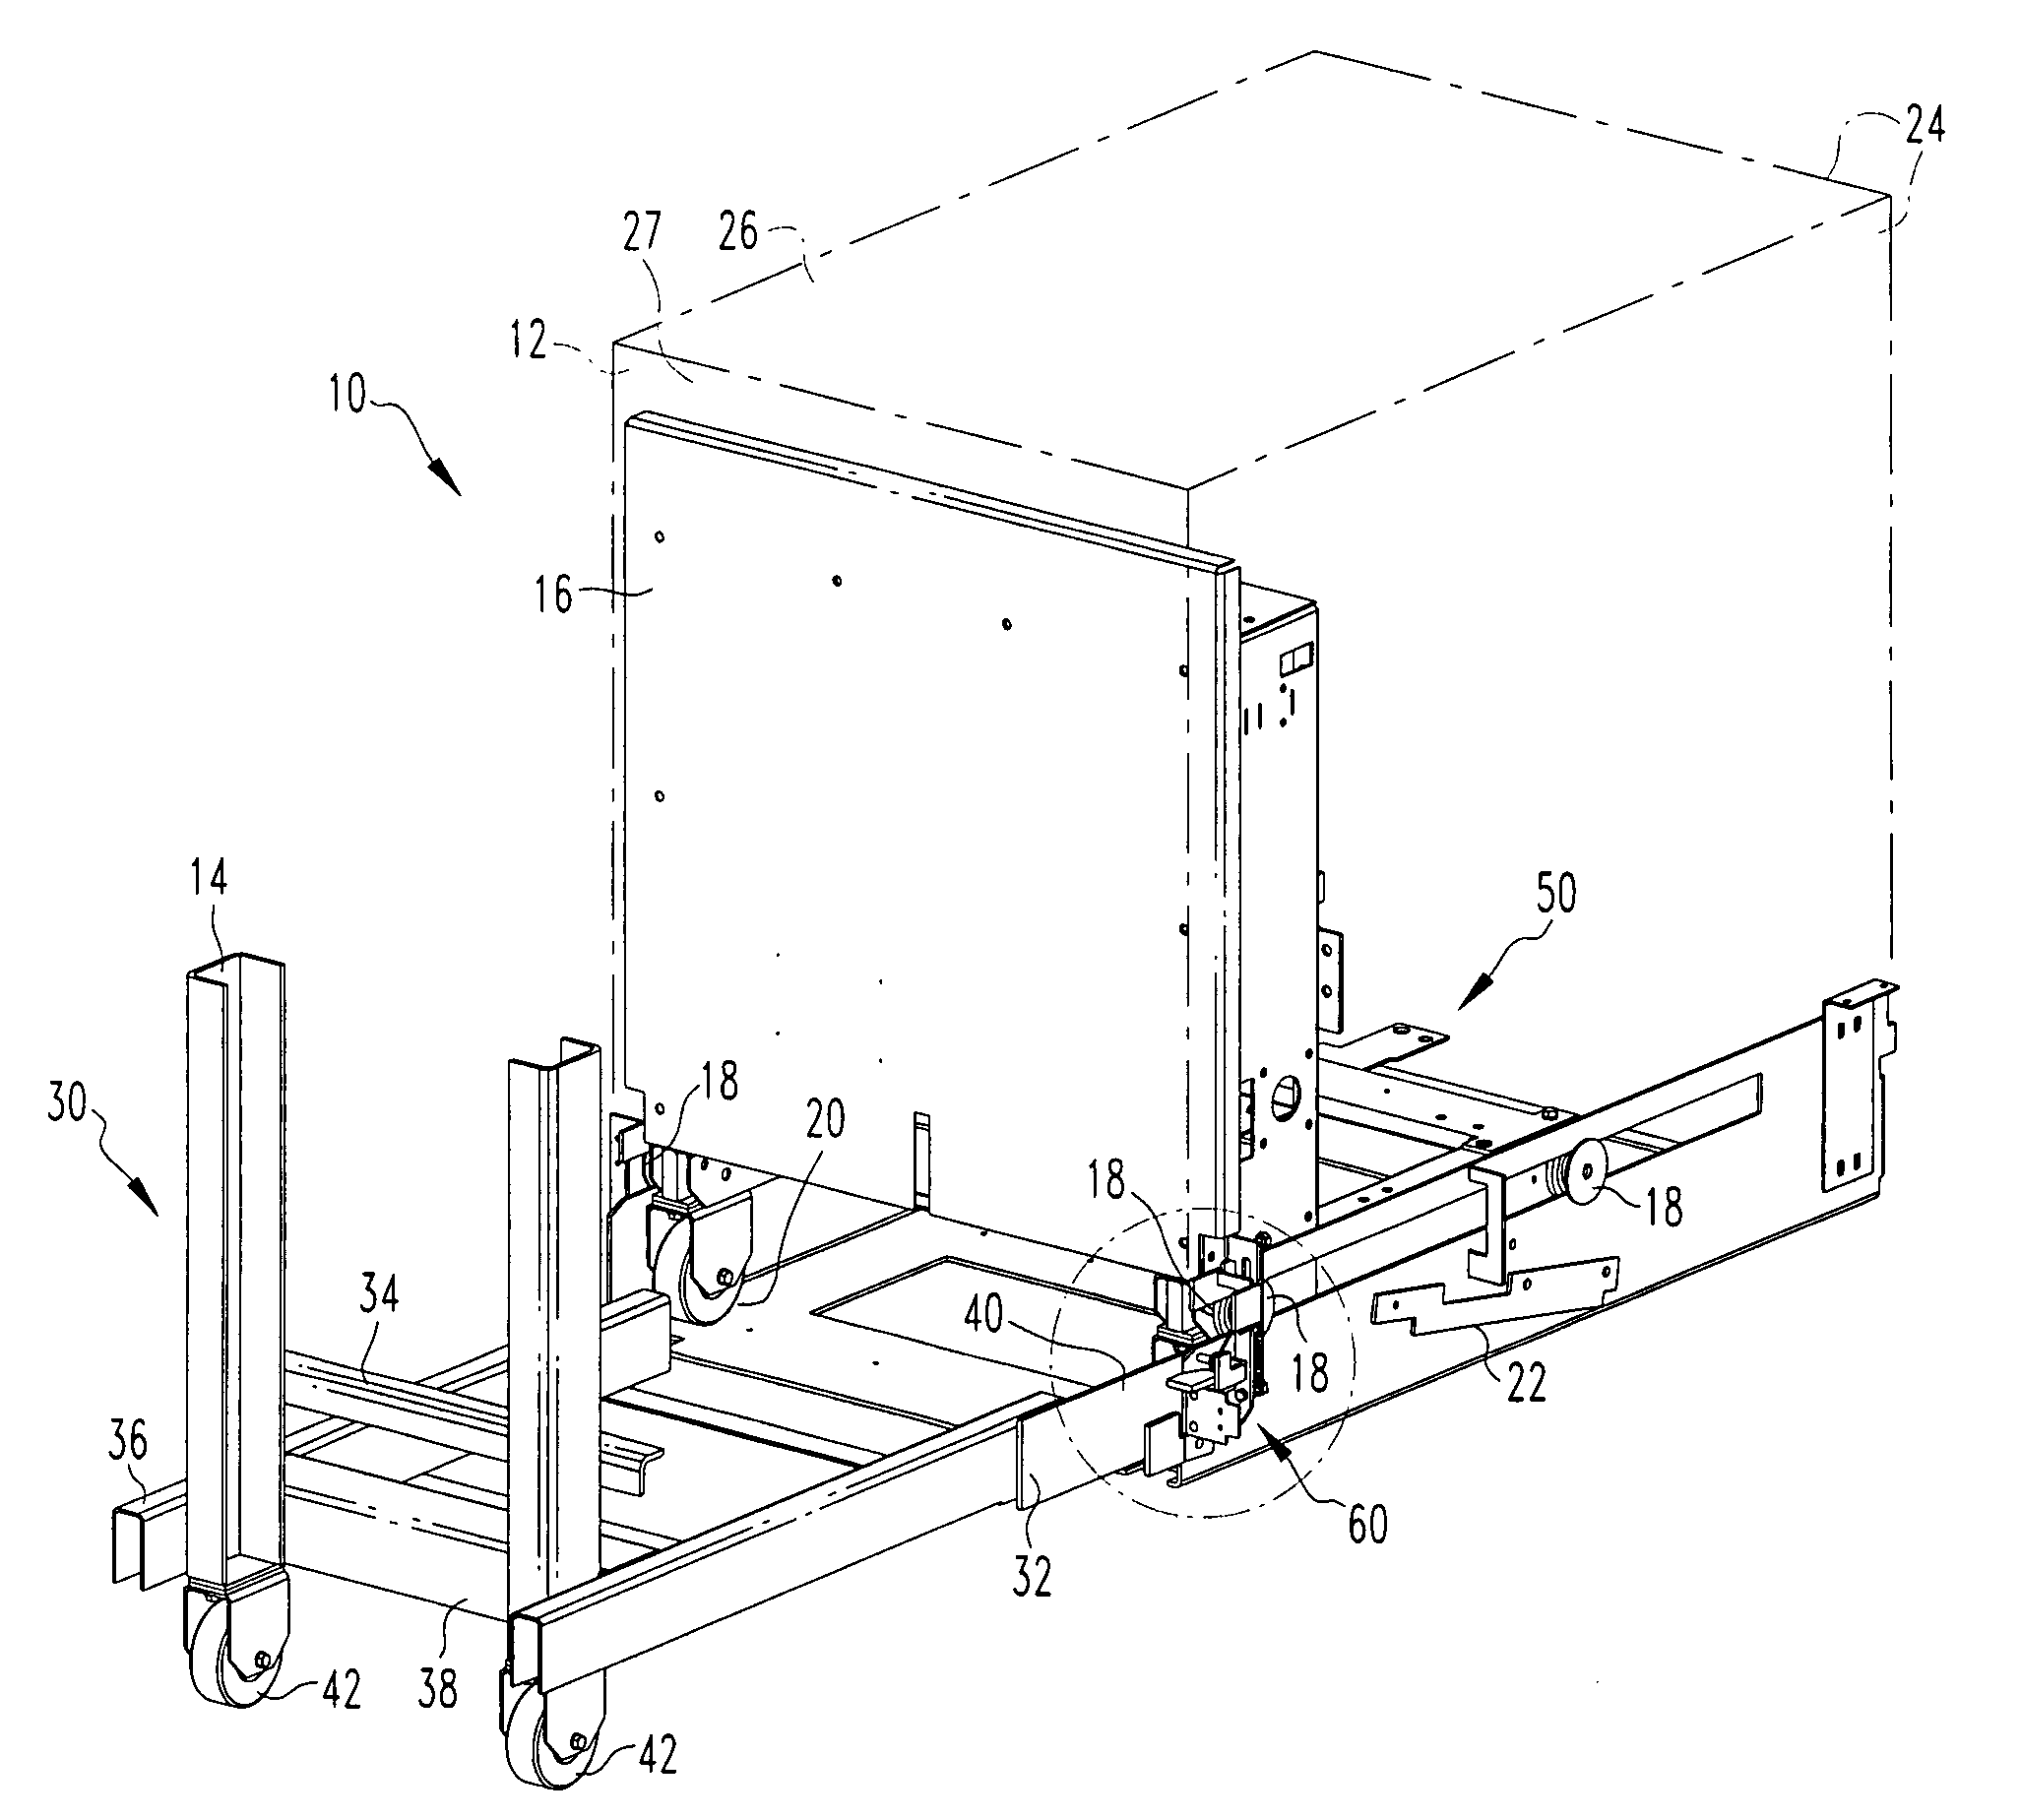 Safety interlock for circuit breaker housing assembly and extraction device